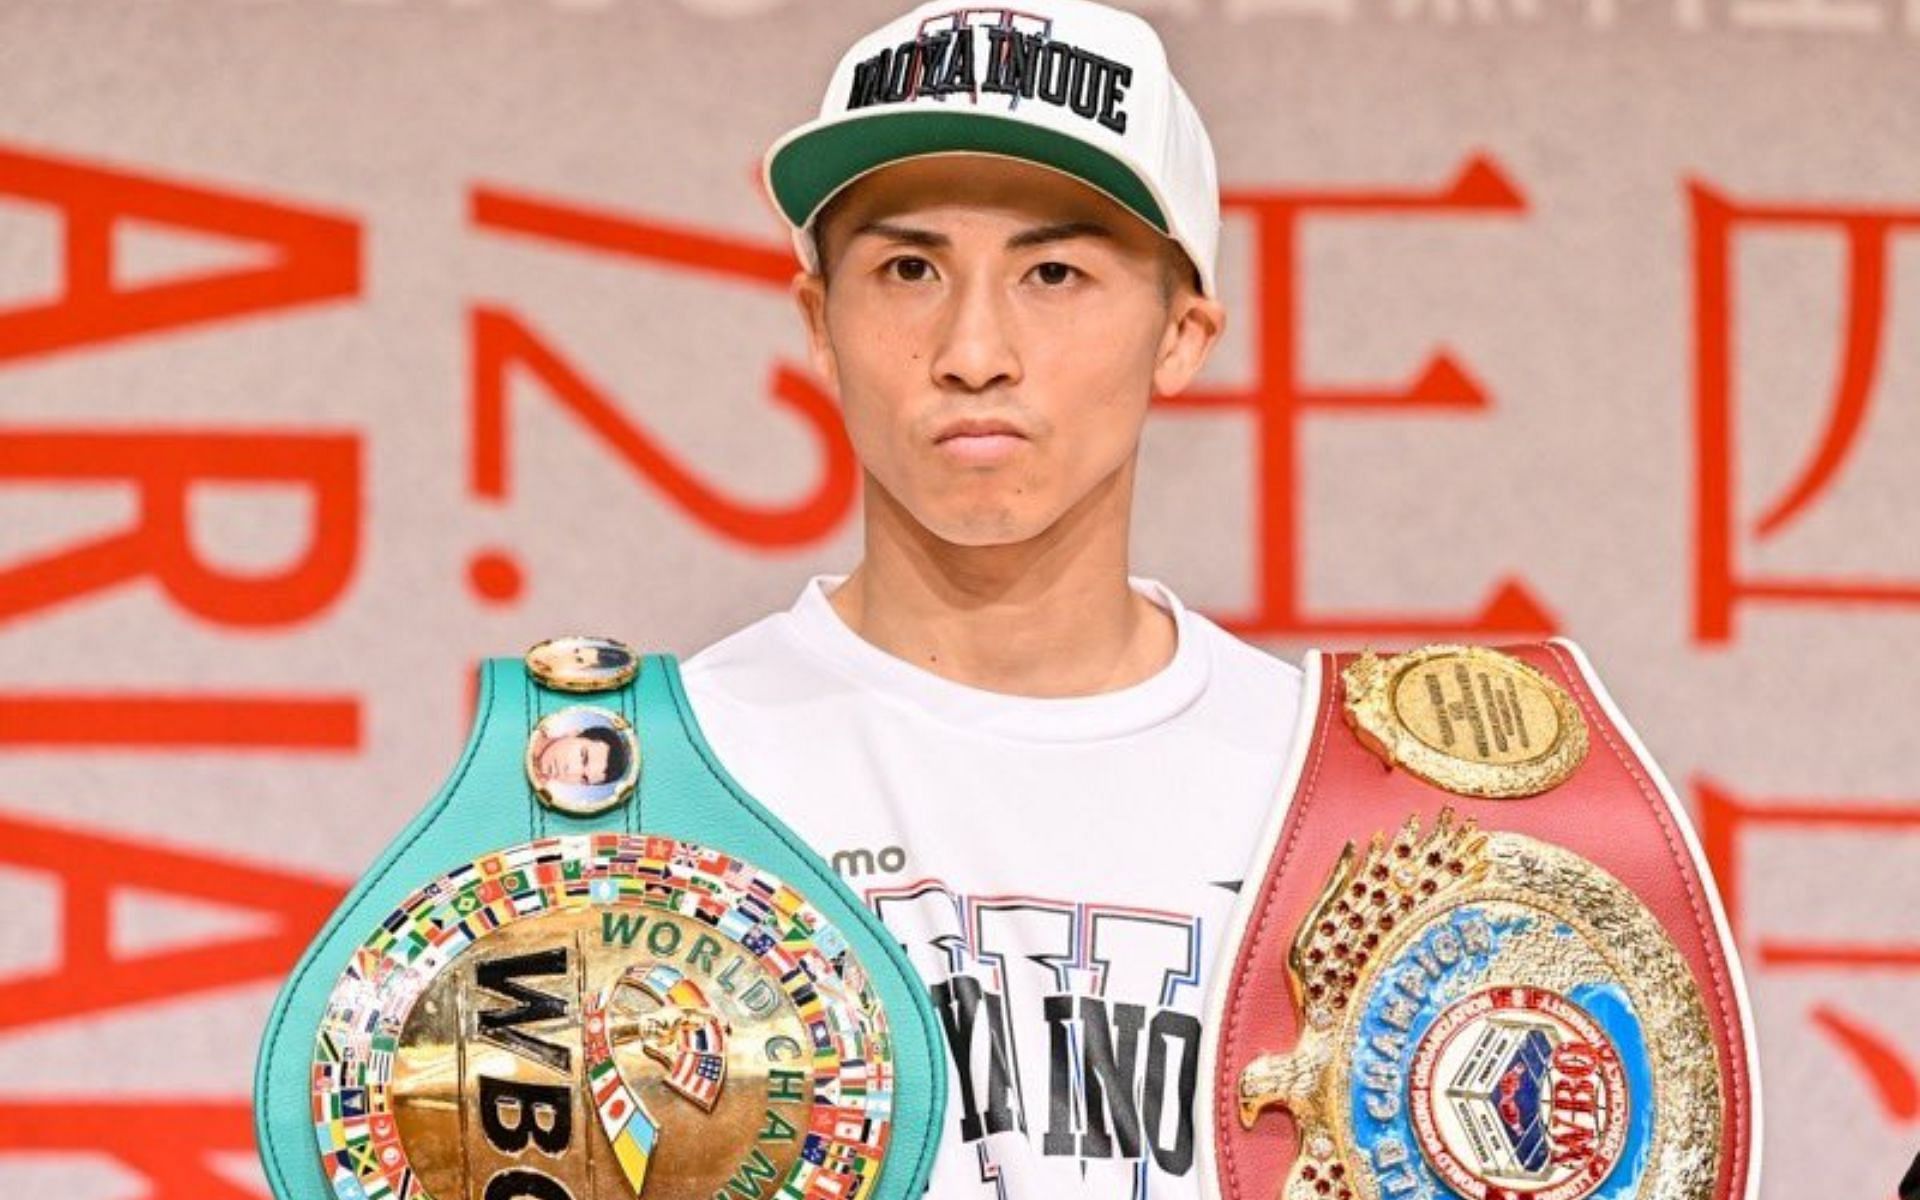 Undisputed super-bantamweight champion Naoya Inoue (pictured) declares fellow boxing great as the No.1 pound-for-pound boxer in the world [Image Courtesy: @naoyainoue_410 on X]